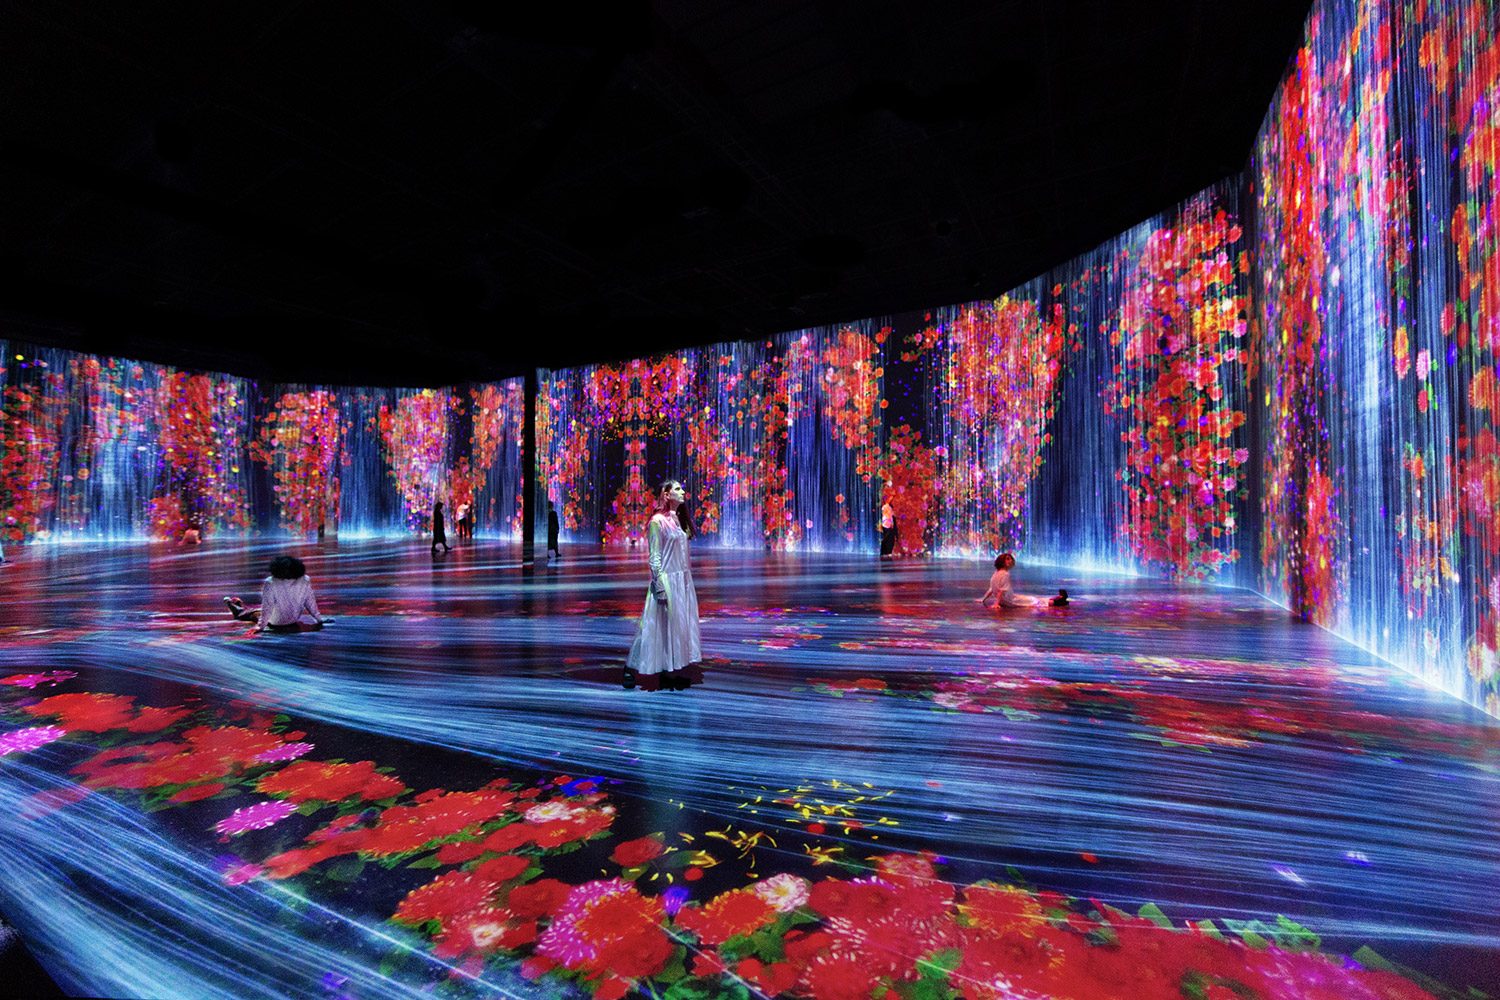 Installation view of Every Wall is a Door, Superblue Miami, 2021. © teamLab, Courtesy Pace Gallery.